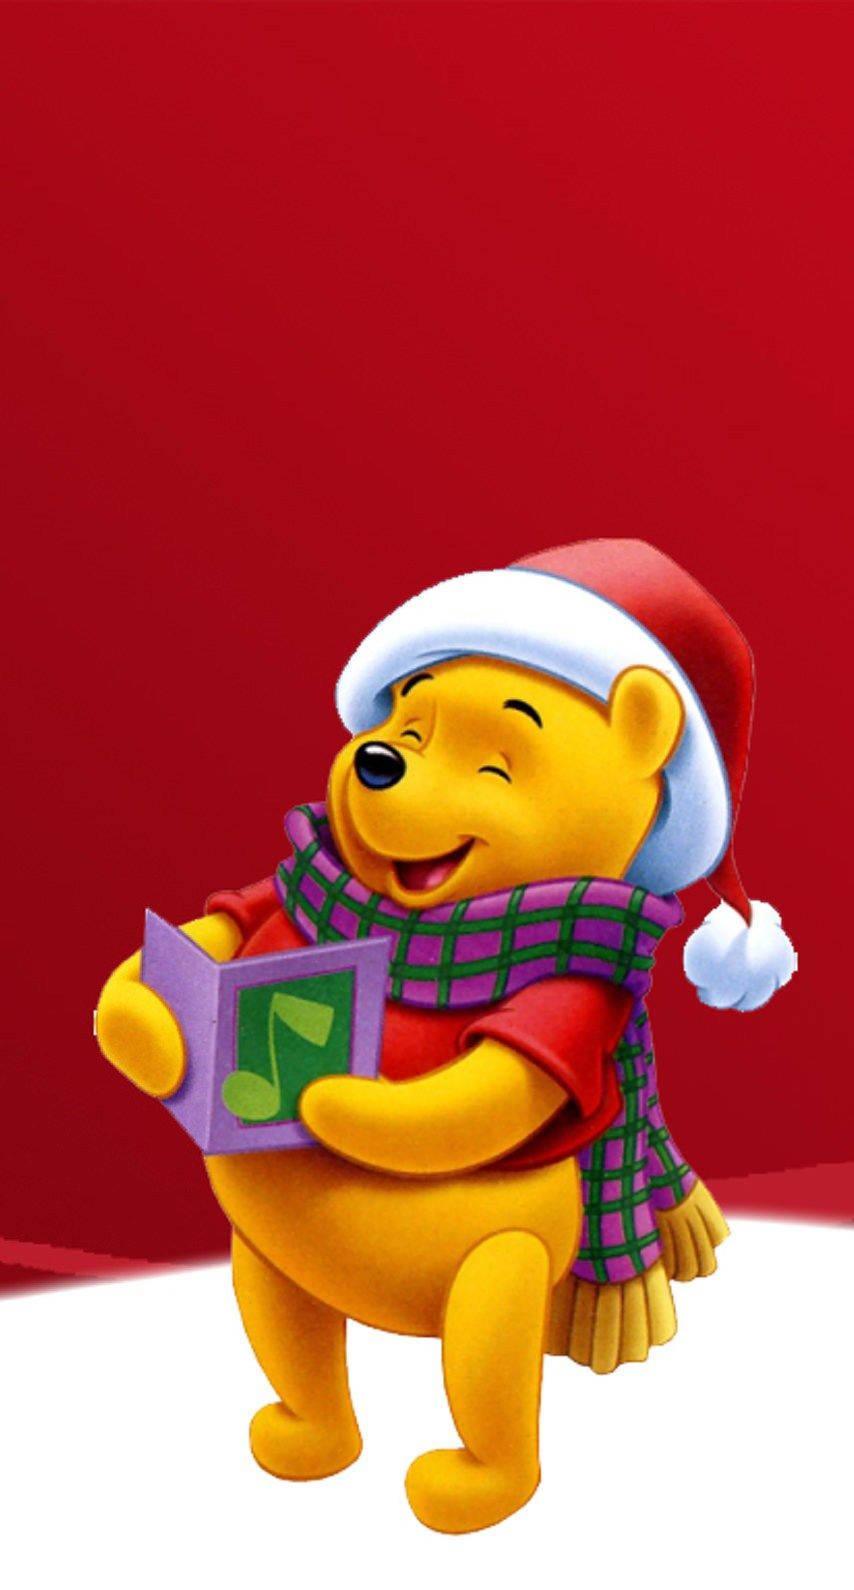 Enjoy the magic of Christmas with Winnie the Pooh Wallpaper